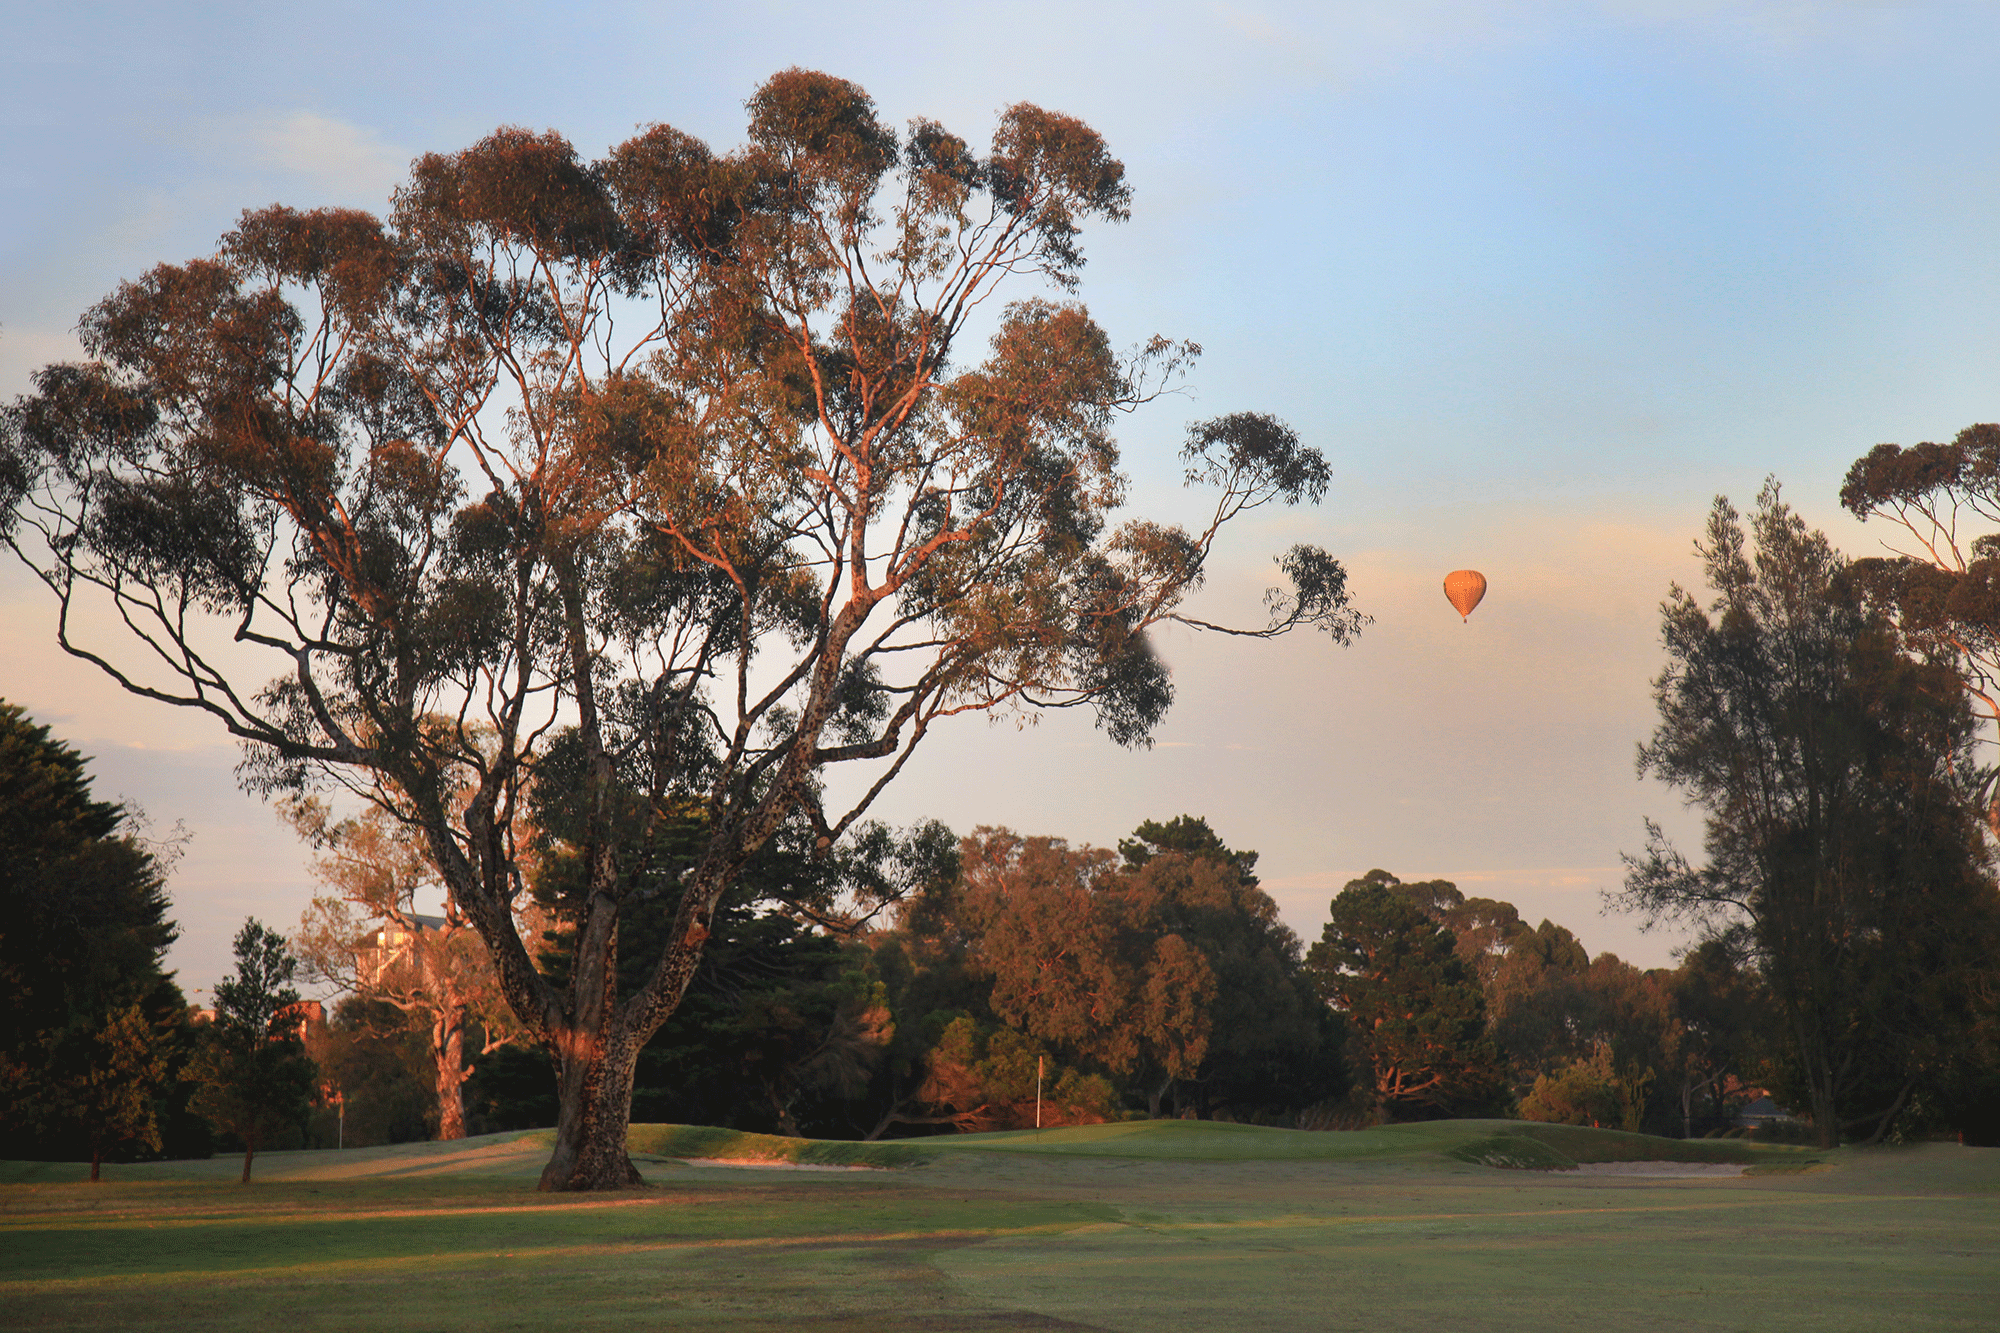 The golf course at sunrise with a hot air balloon in the distance